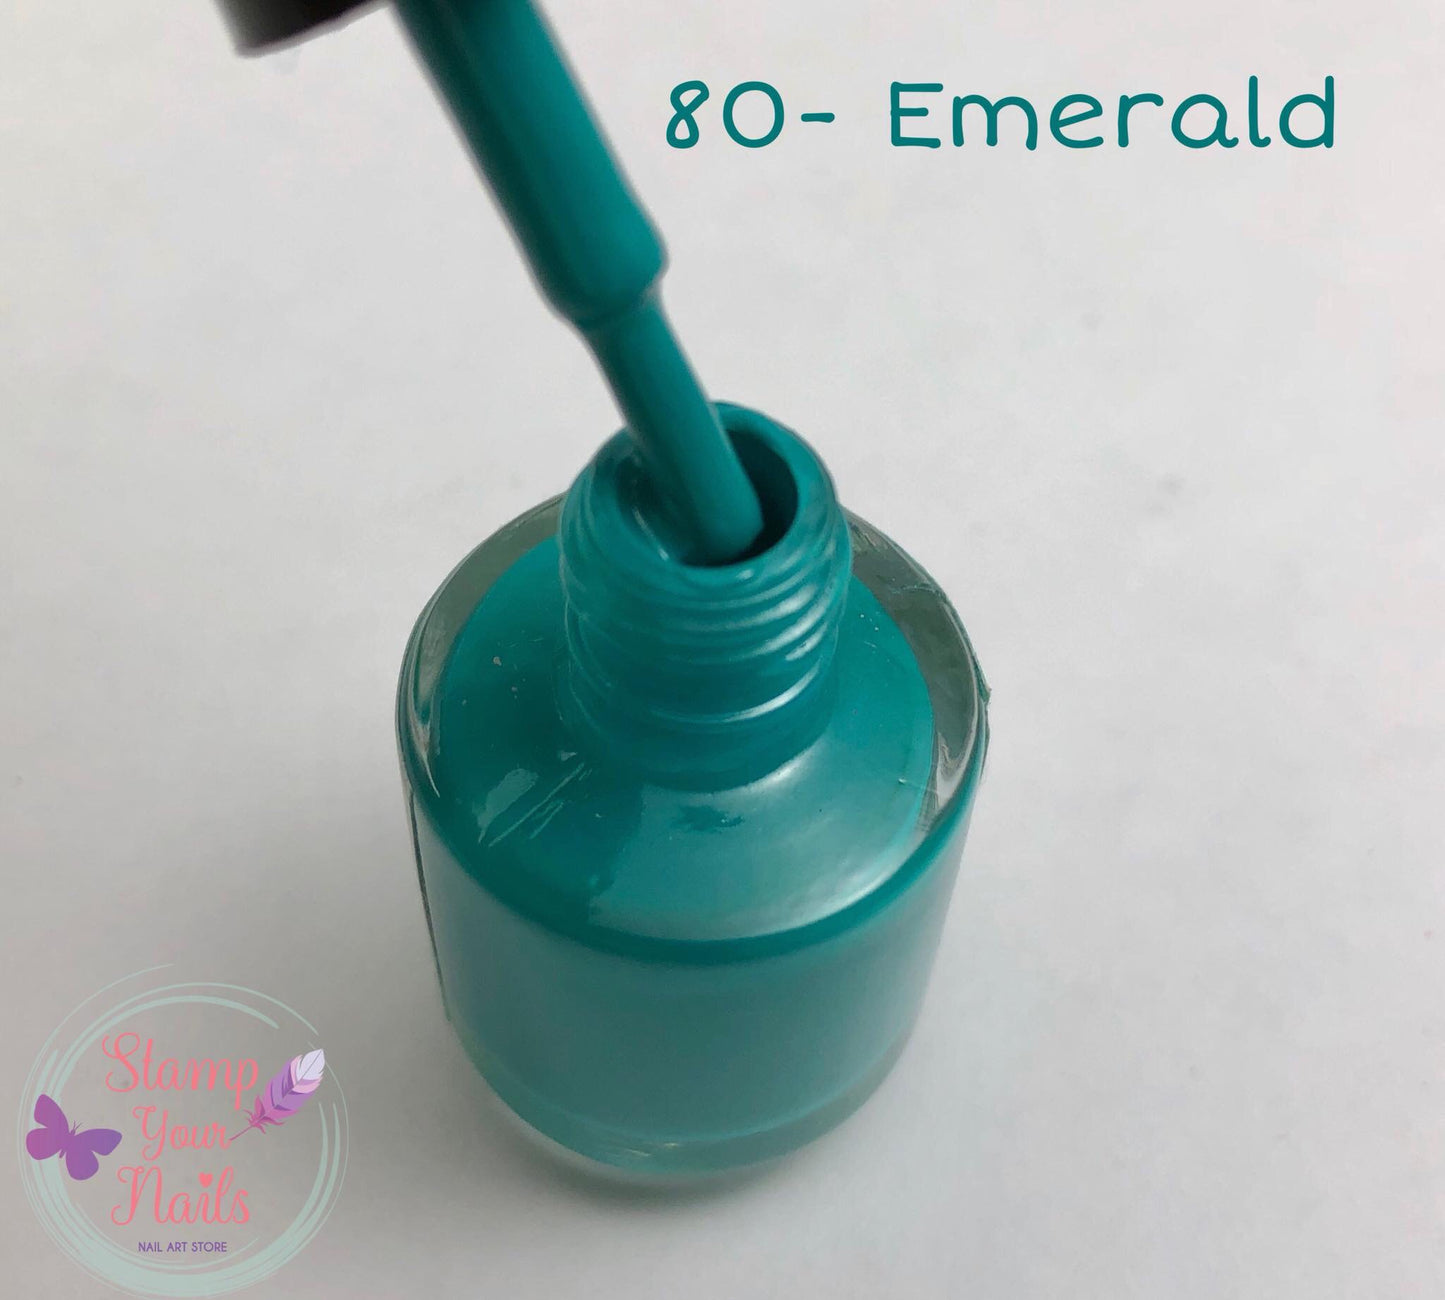 80 Emerald - Stamp your nails